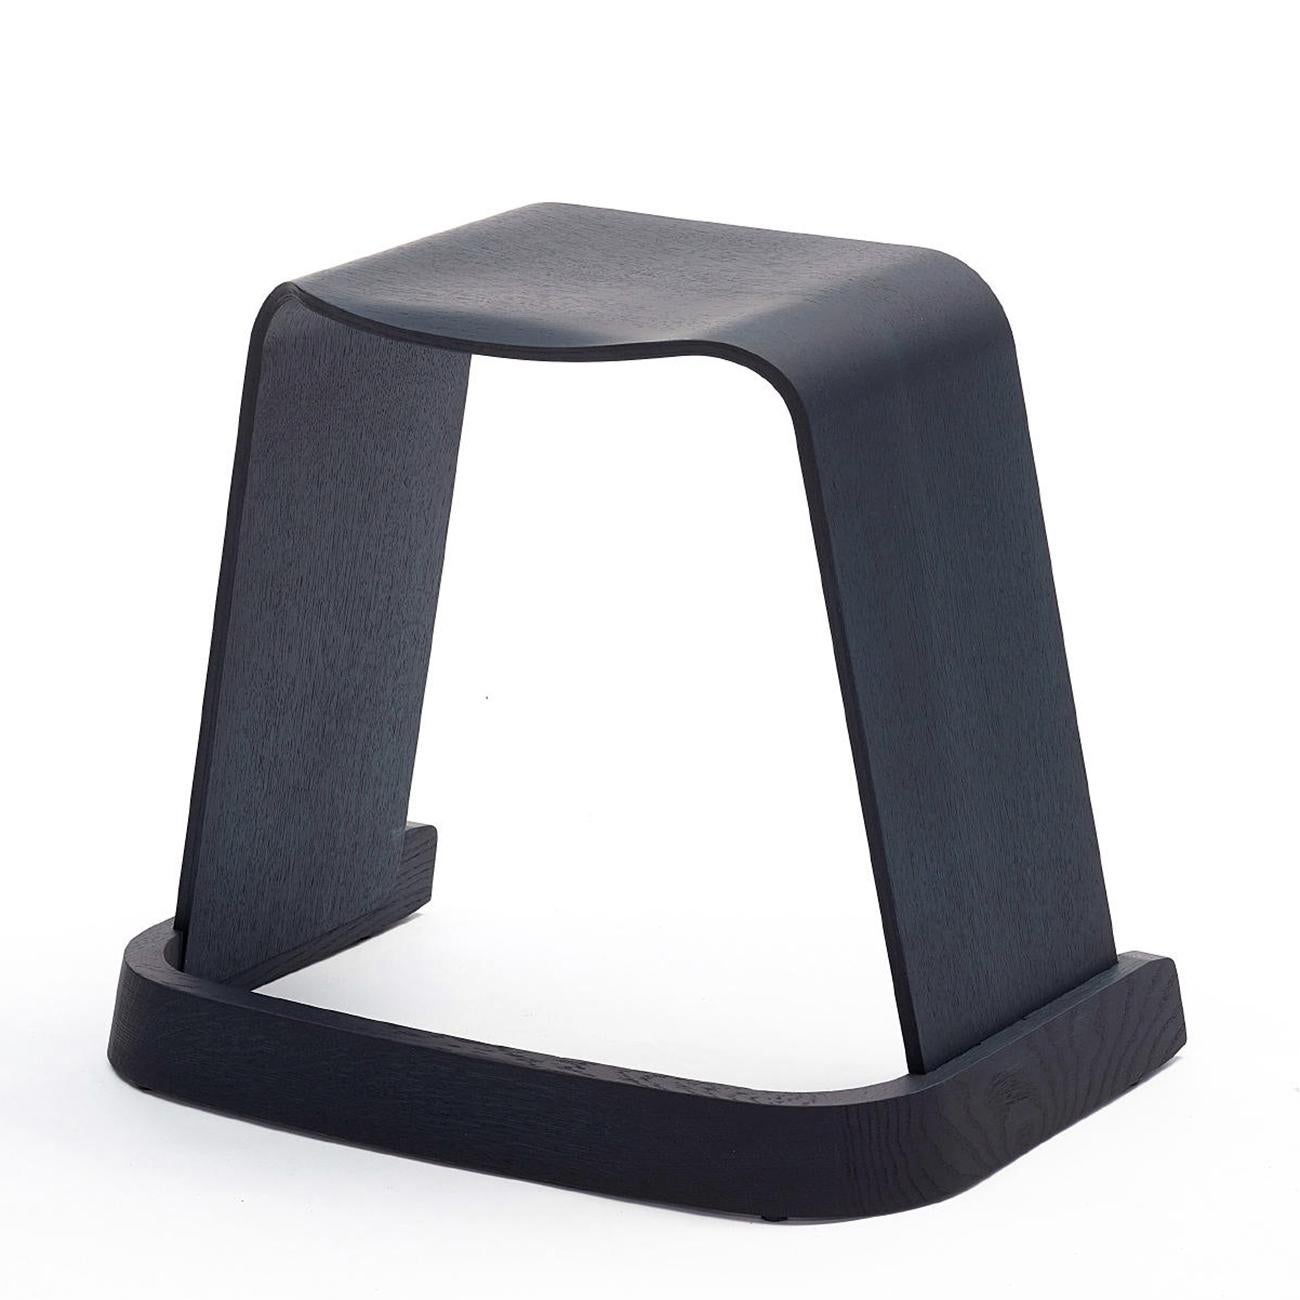 Stool Arch black oak all in solid
hand-crafted oak in black stained finish.
Also available in natural oak finish, on request.